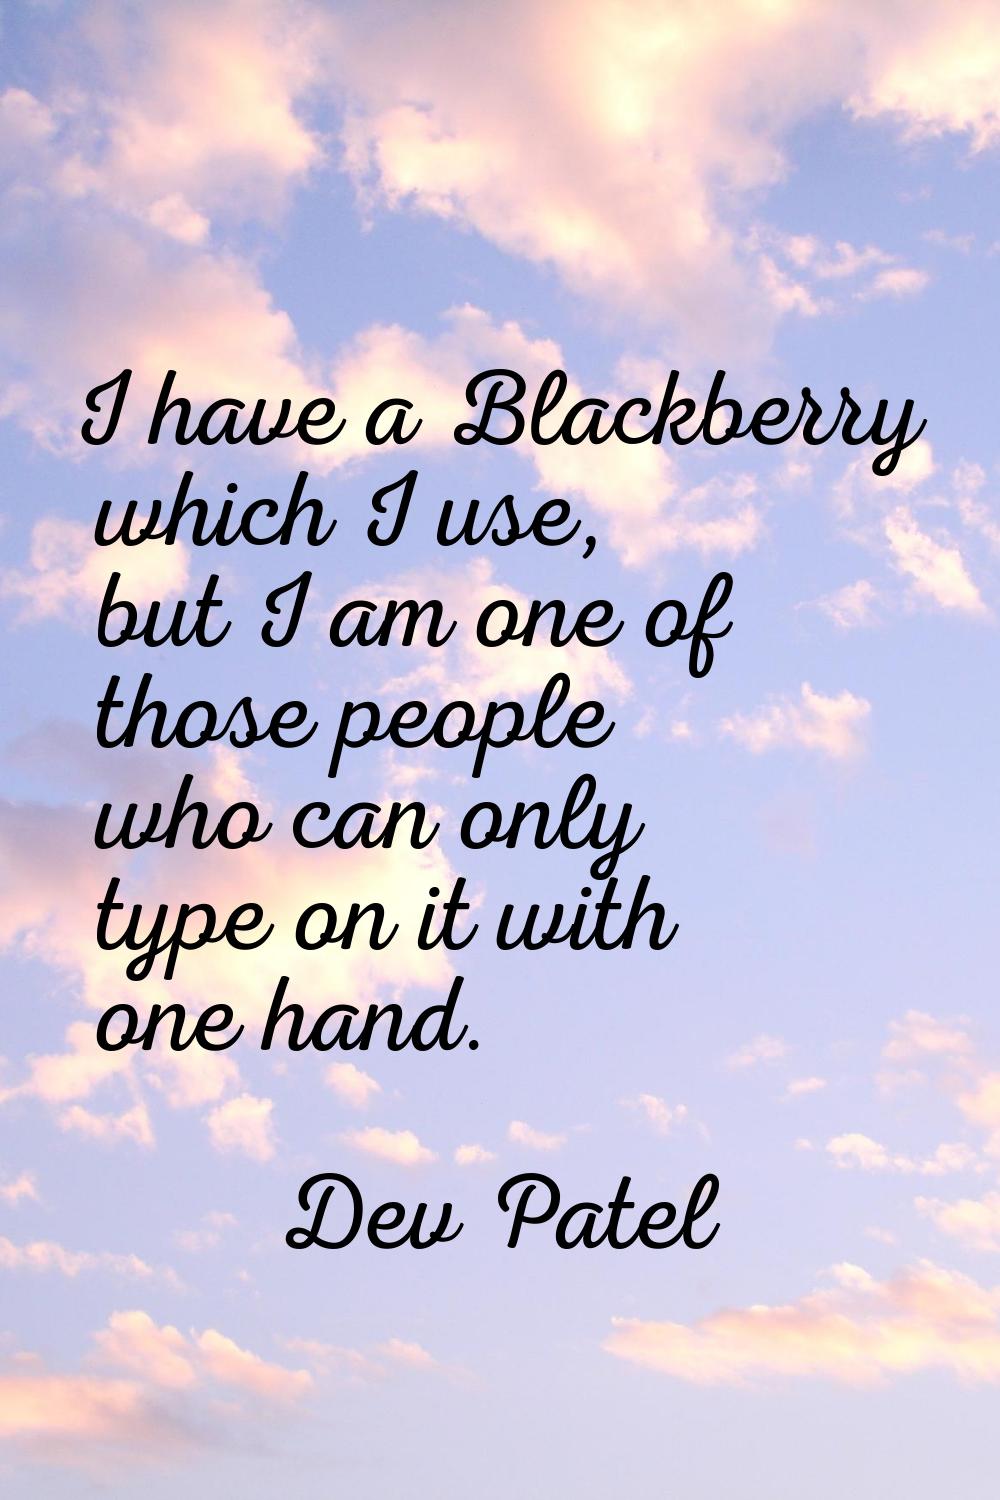 I have a Blackberry which I use, but I am one of those people who can only type on it with one hand